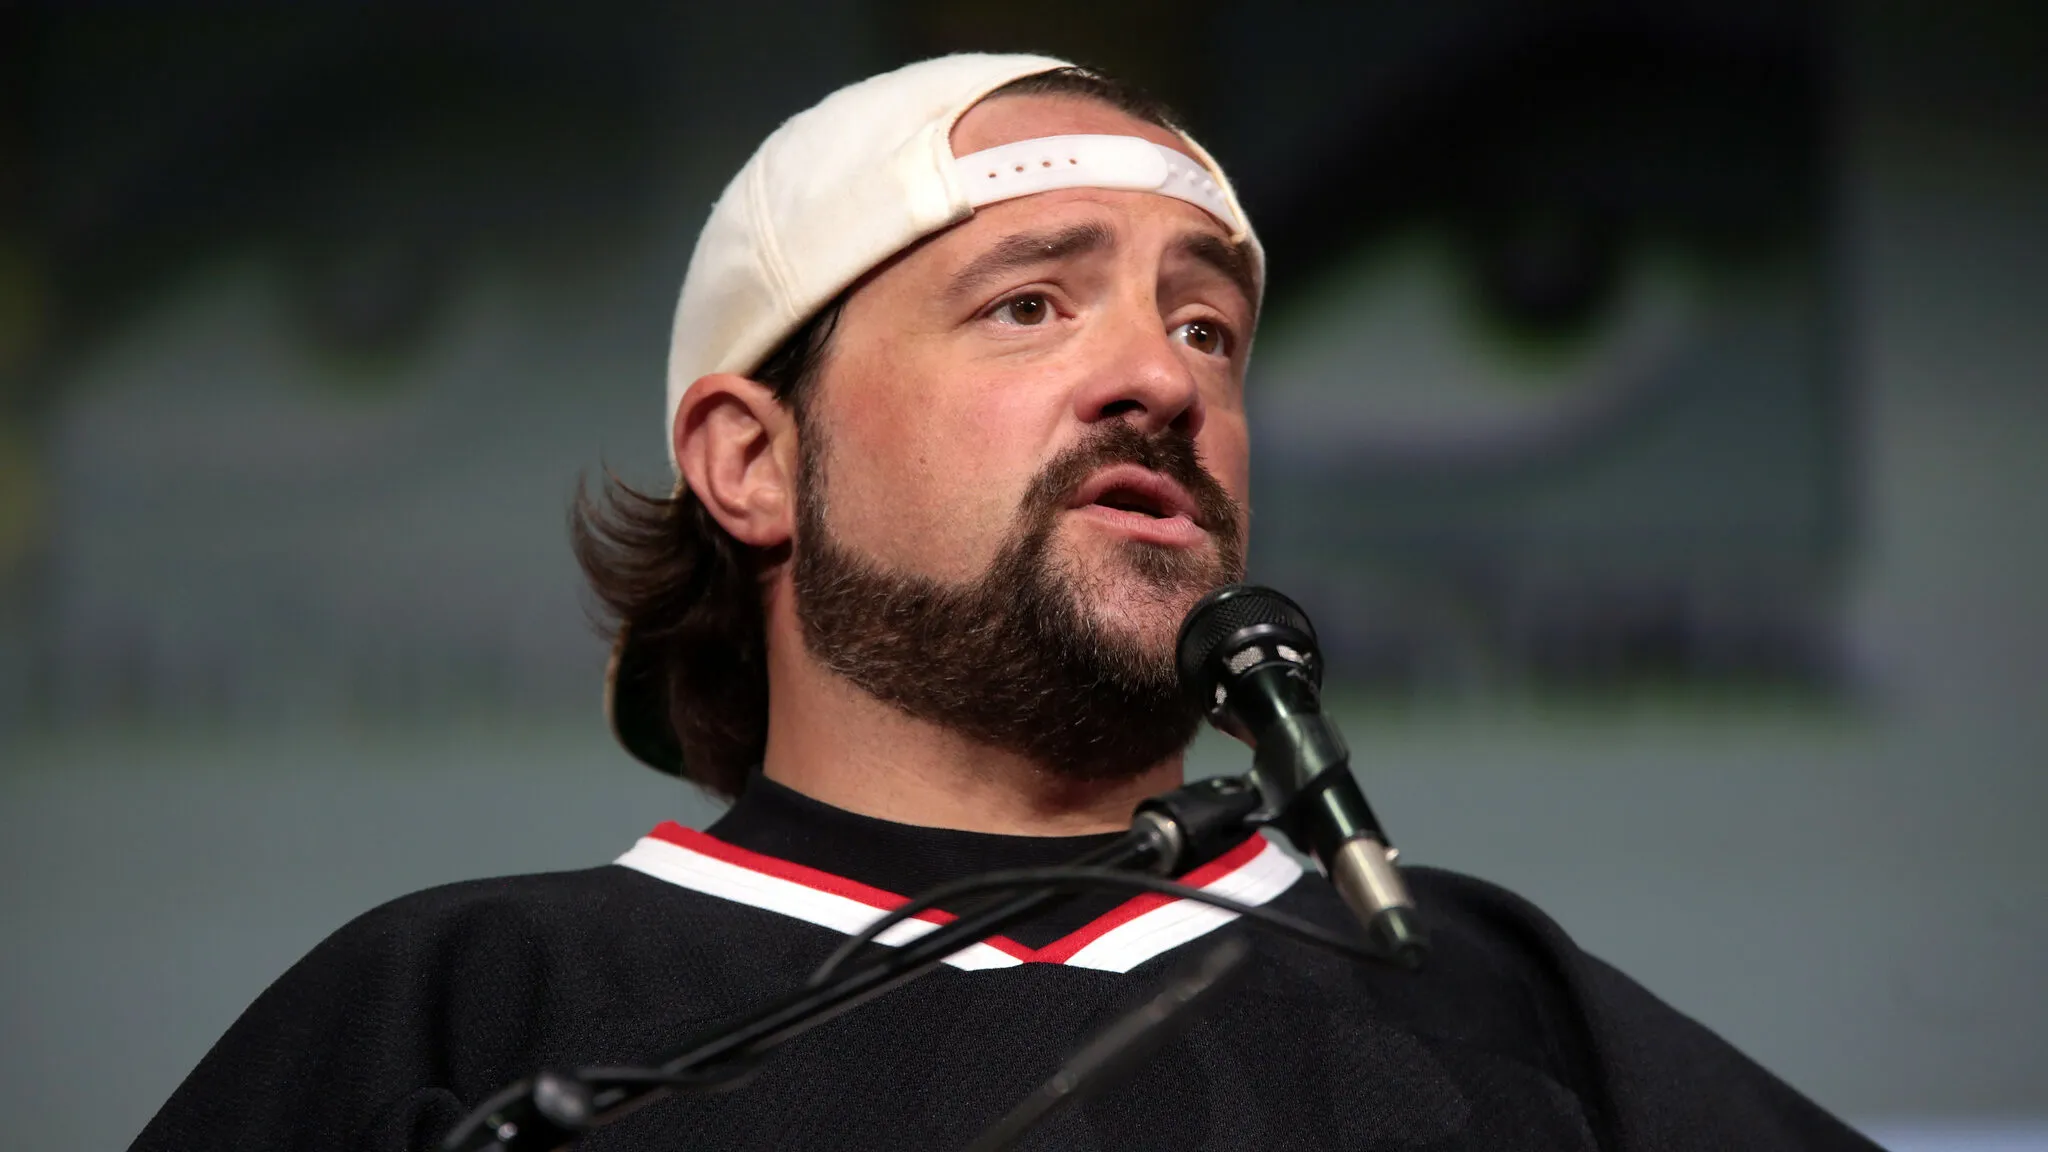 Kevin Smith is getting bit after wading into the Scorsese/Marvel debate